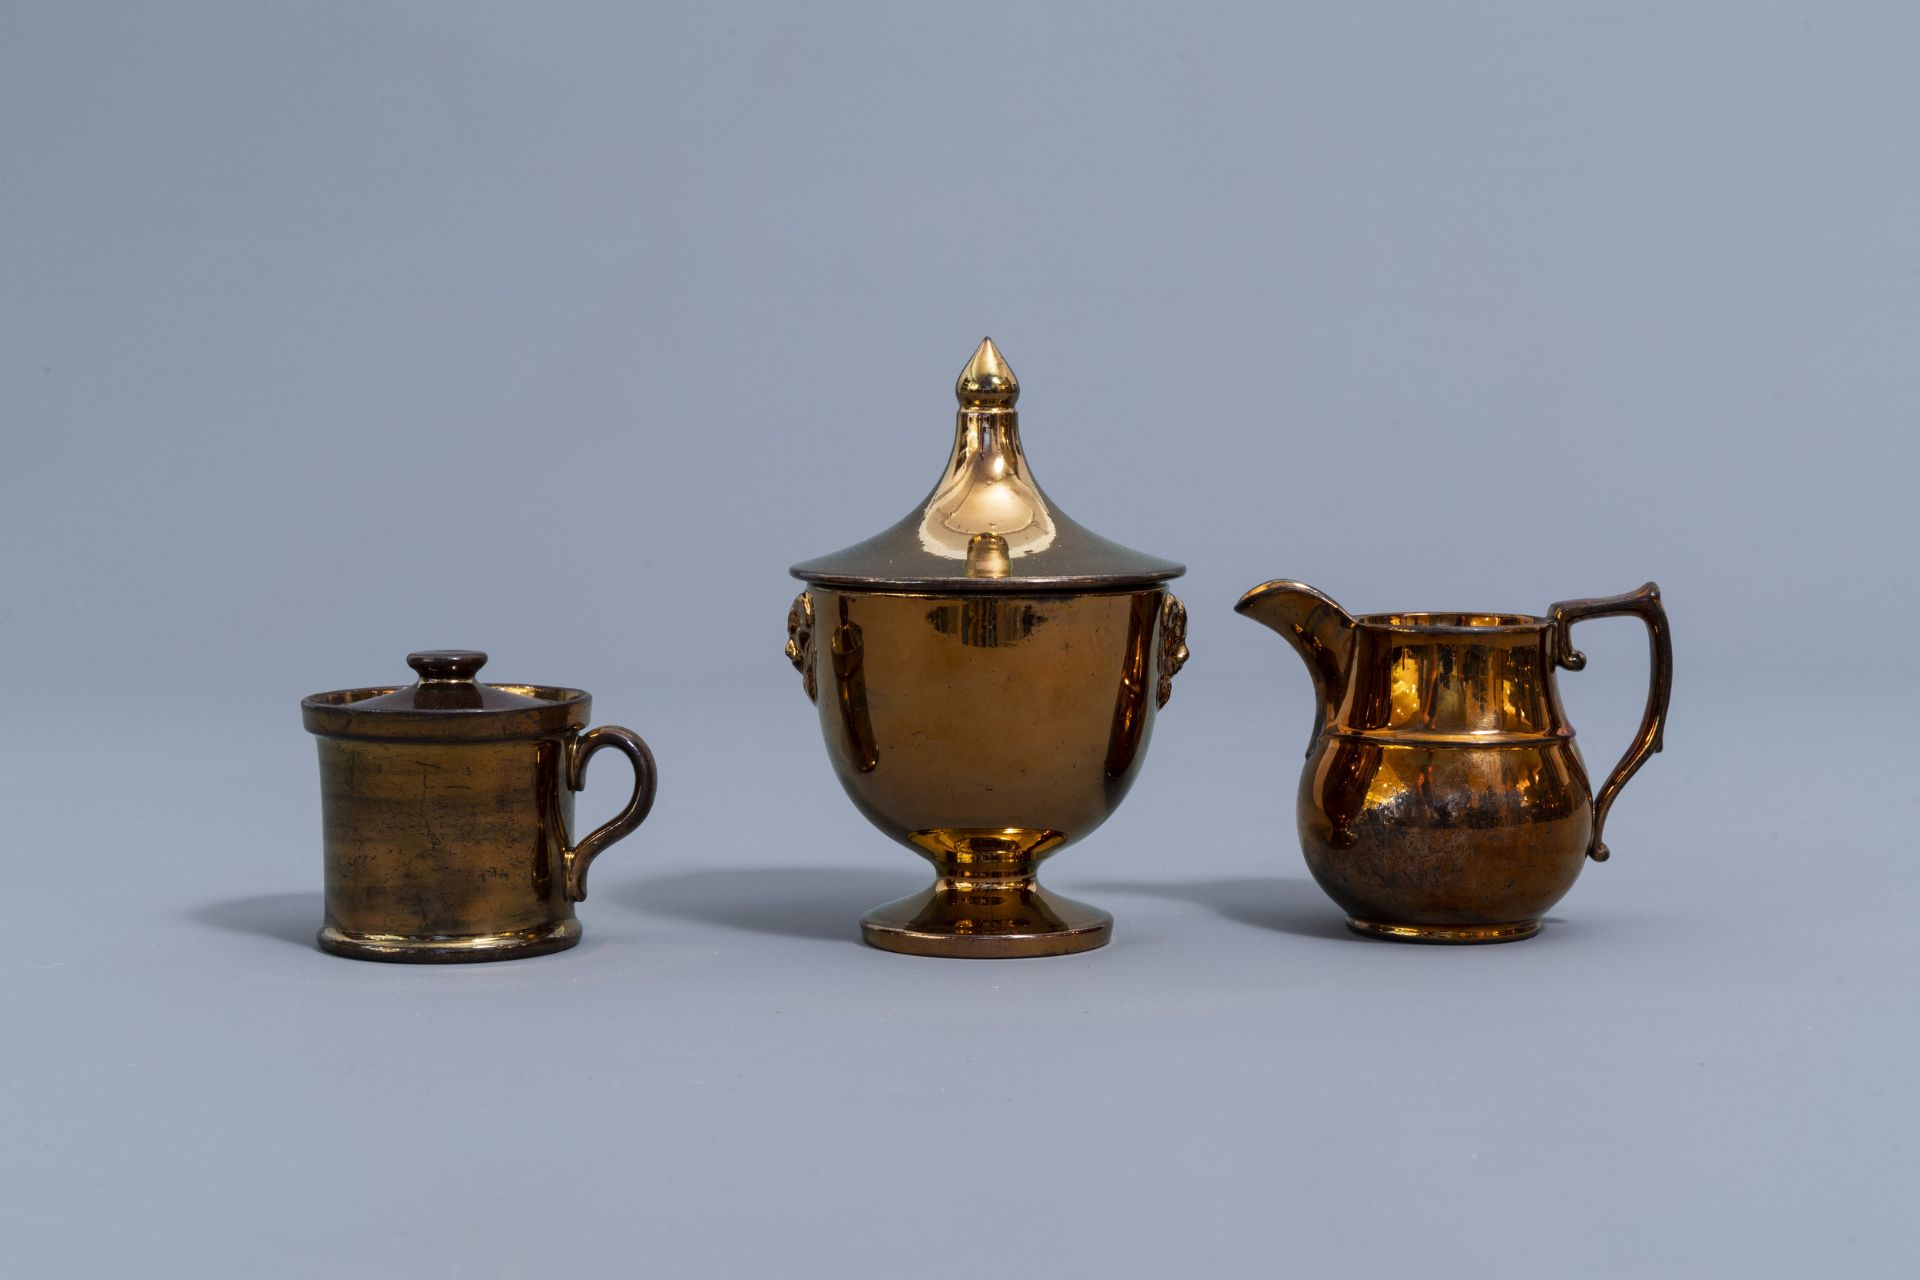 A varied collection of English monochrome copper lustreware items, 19th C. - Image 20 of 50